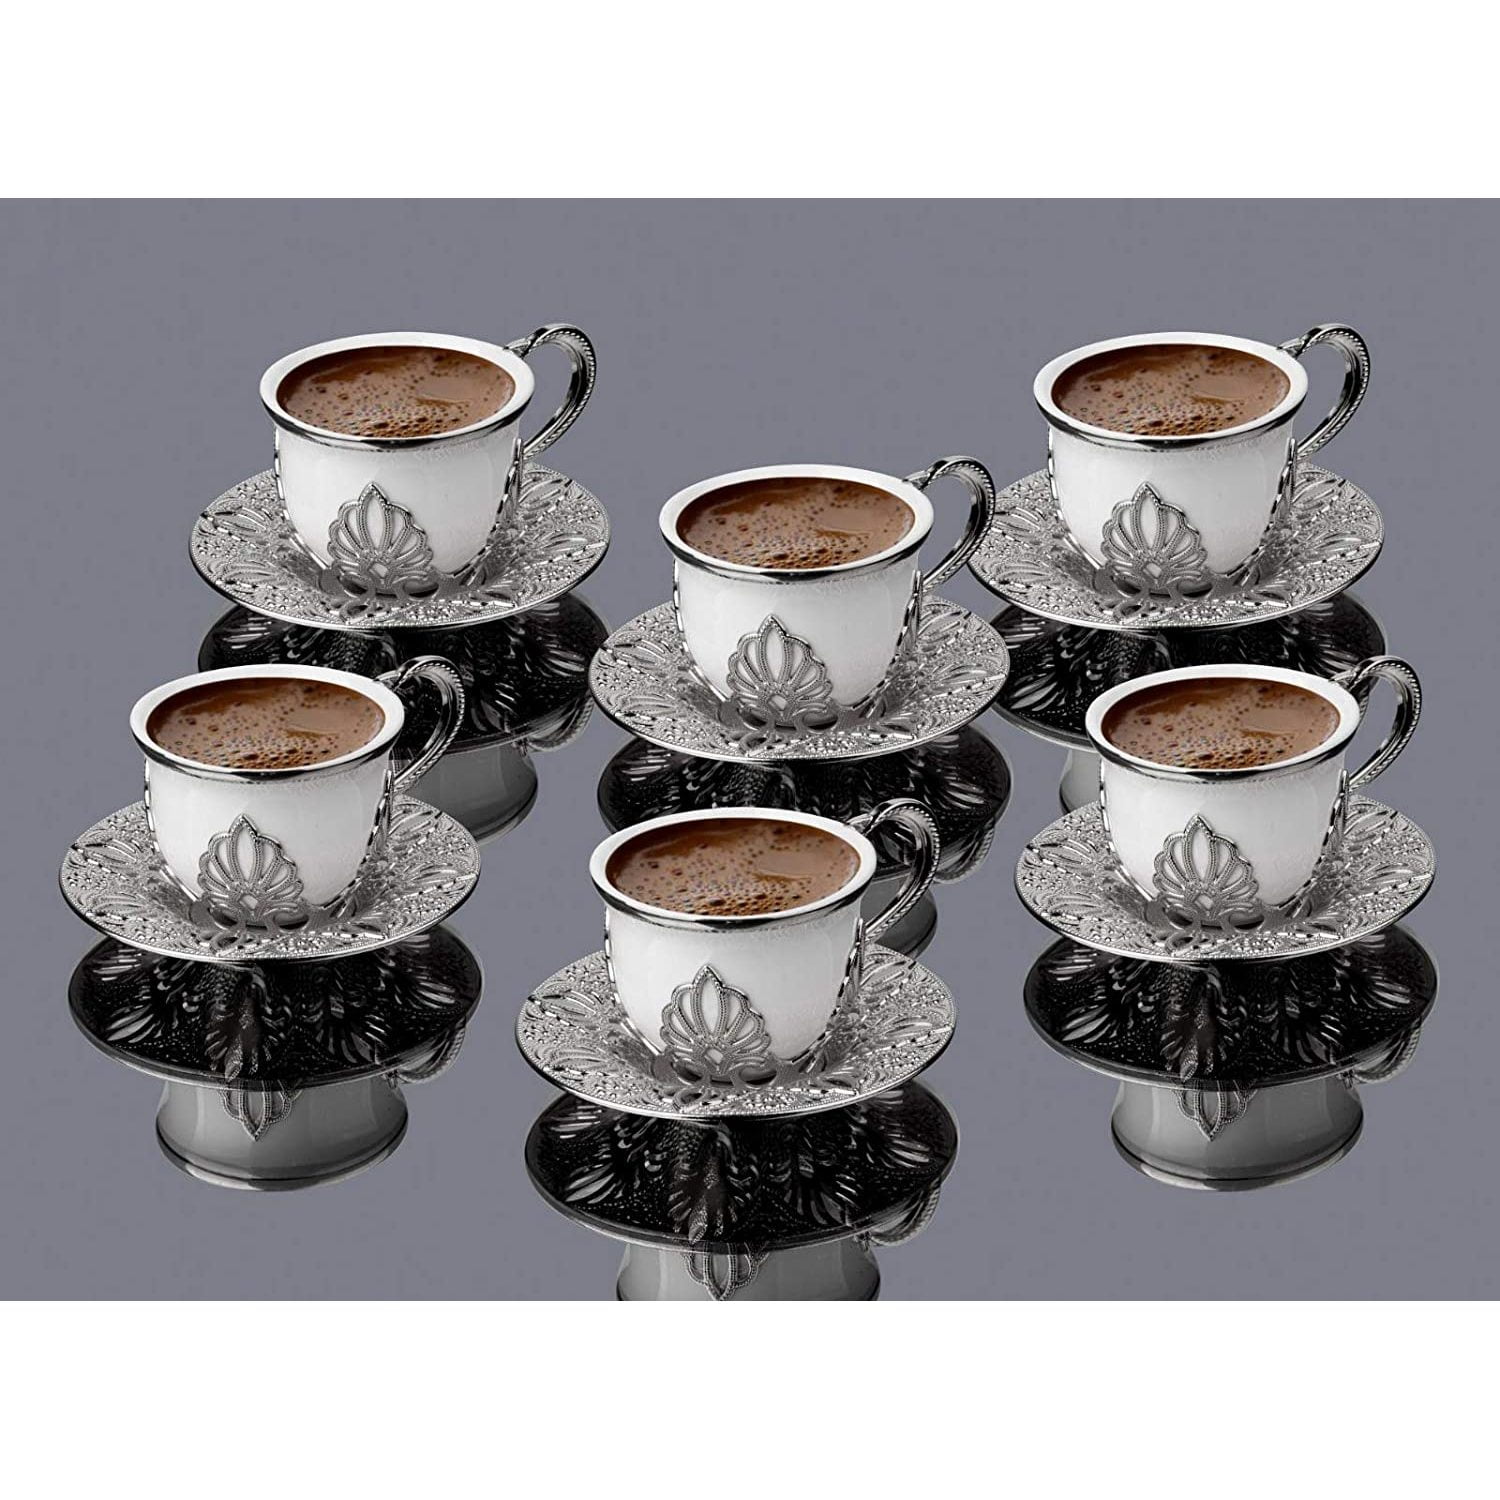 LE TAUCI 3 oz Espresso Cups with Saucers, House-warming Gift, Ceramic  Embossment Coffee Cup for Doub…See more LE TAUCI 3 oz Espresso Cups with